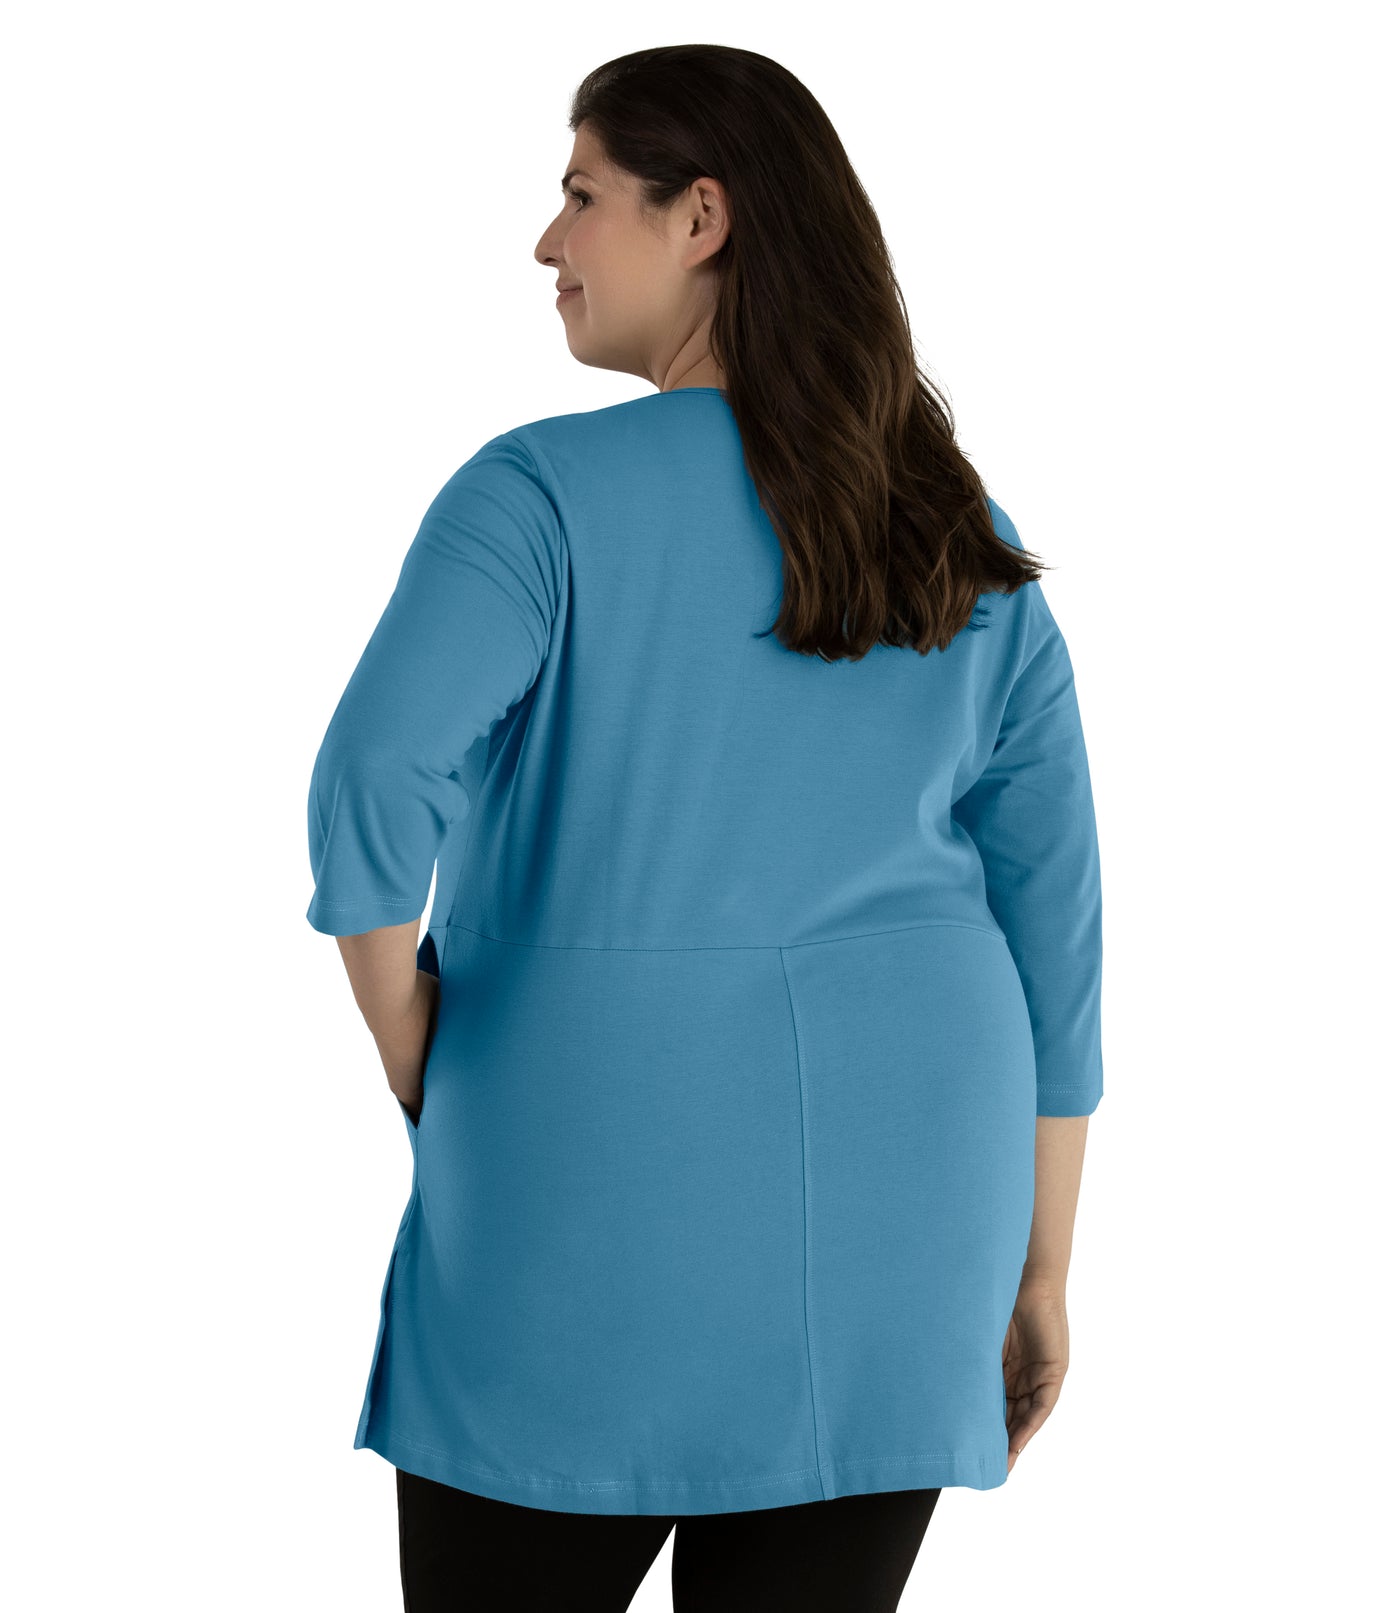 Plus size woman, facing back, wearing JunoActive plus size Stretch Naturals Empire Tunic with Pockets in the color Dusty Teal. Her left hand is in the tunic pocket at her waist level. She is wearing JunoActive Plus Size Leggings in the color Black.